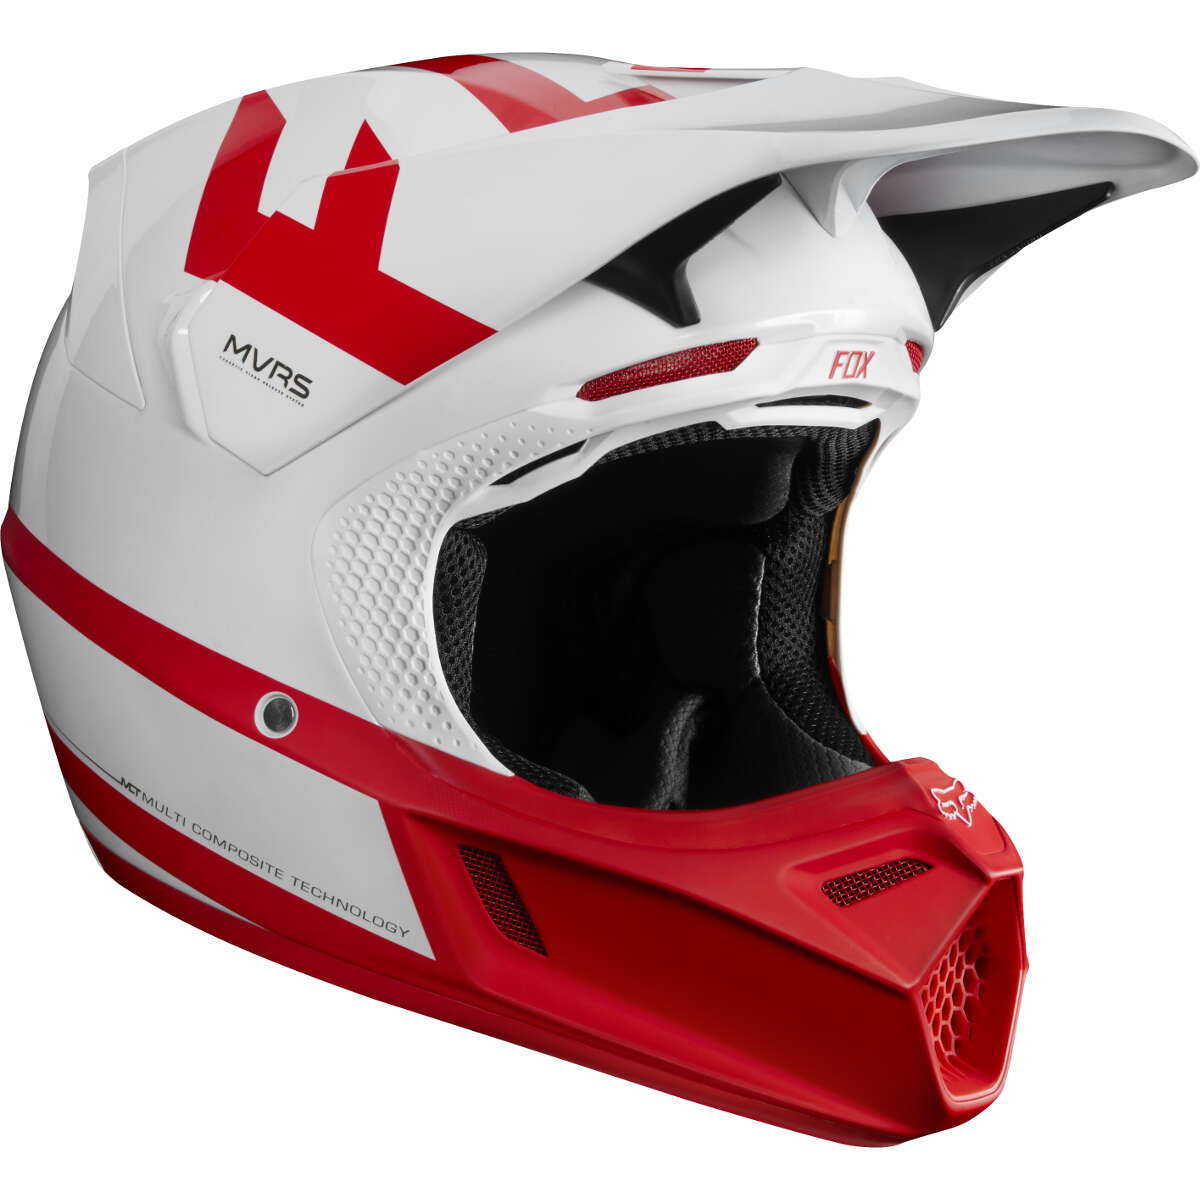 Fox Helmet V3 MVRS Preest - White/Red - Limited Edition Indianapolis